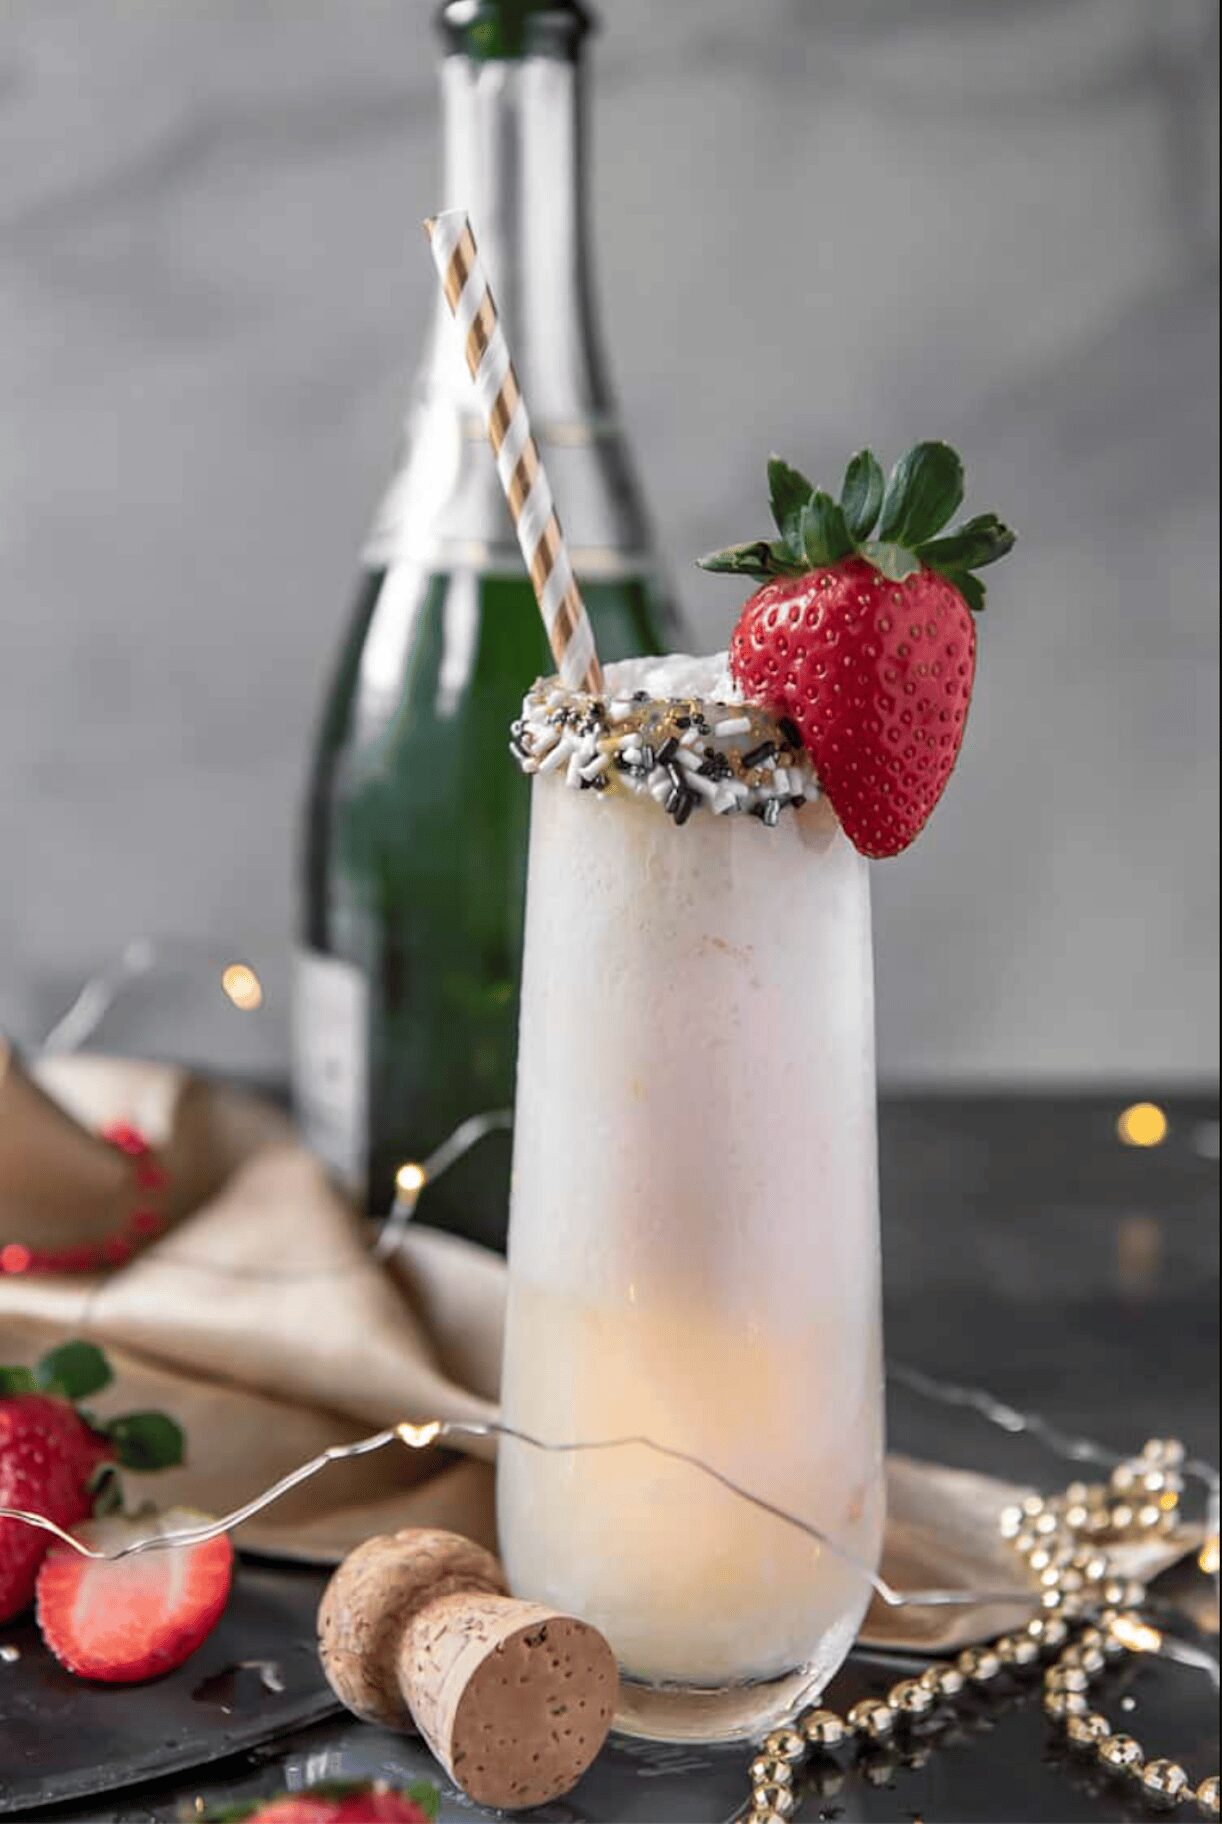 Champagne Ice Cream Floats for New Years Eve